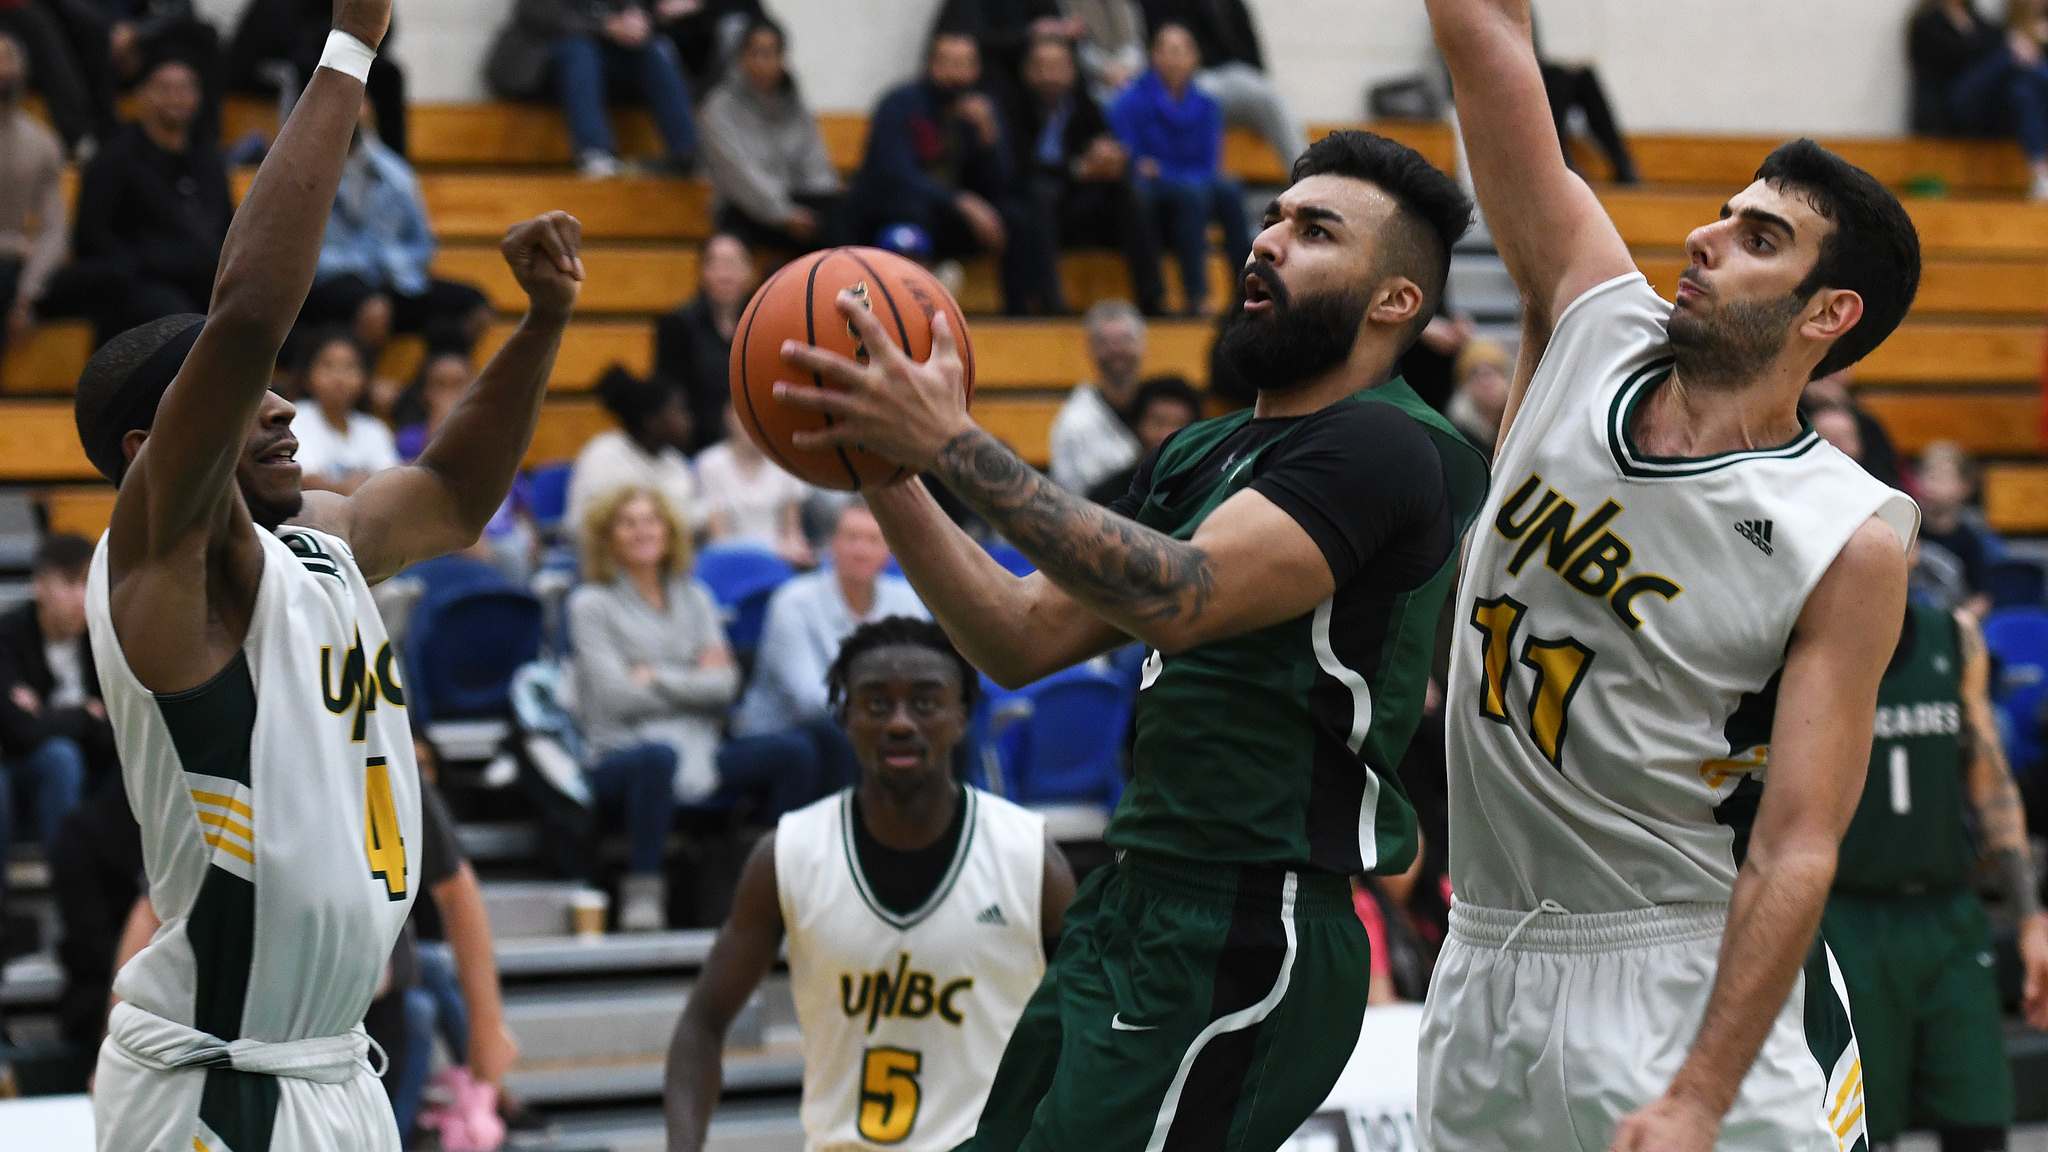 Cascades sweep the Timberwolves in fun weekend of hoops